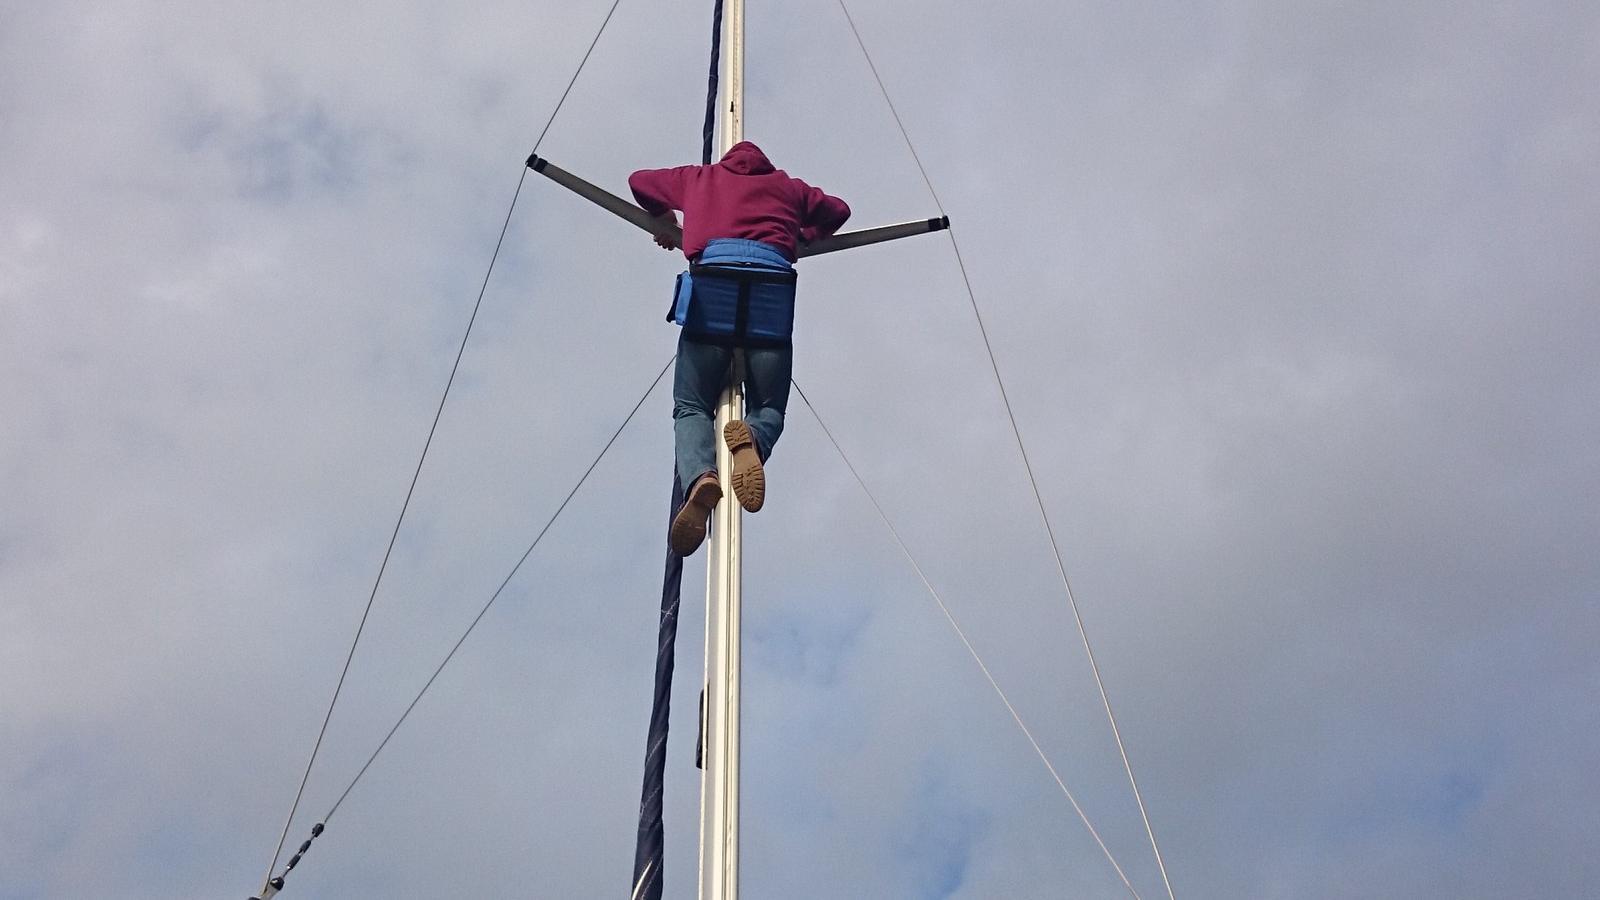 Only the bravest can climb the mast